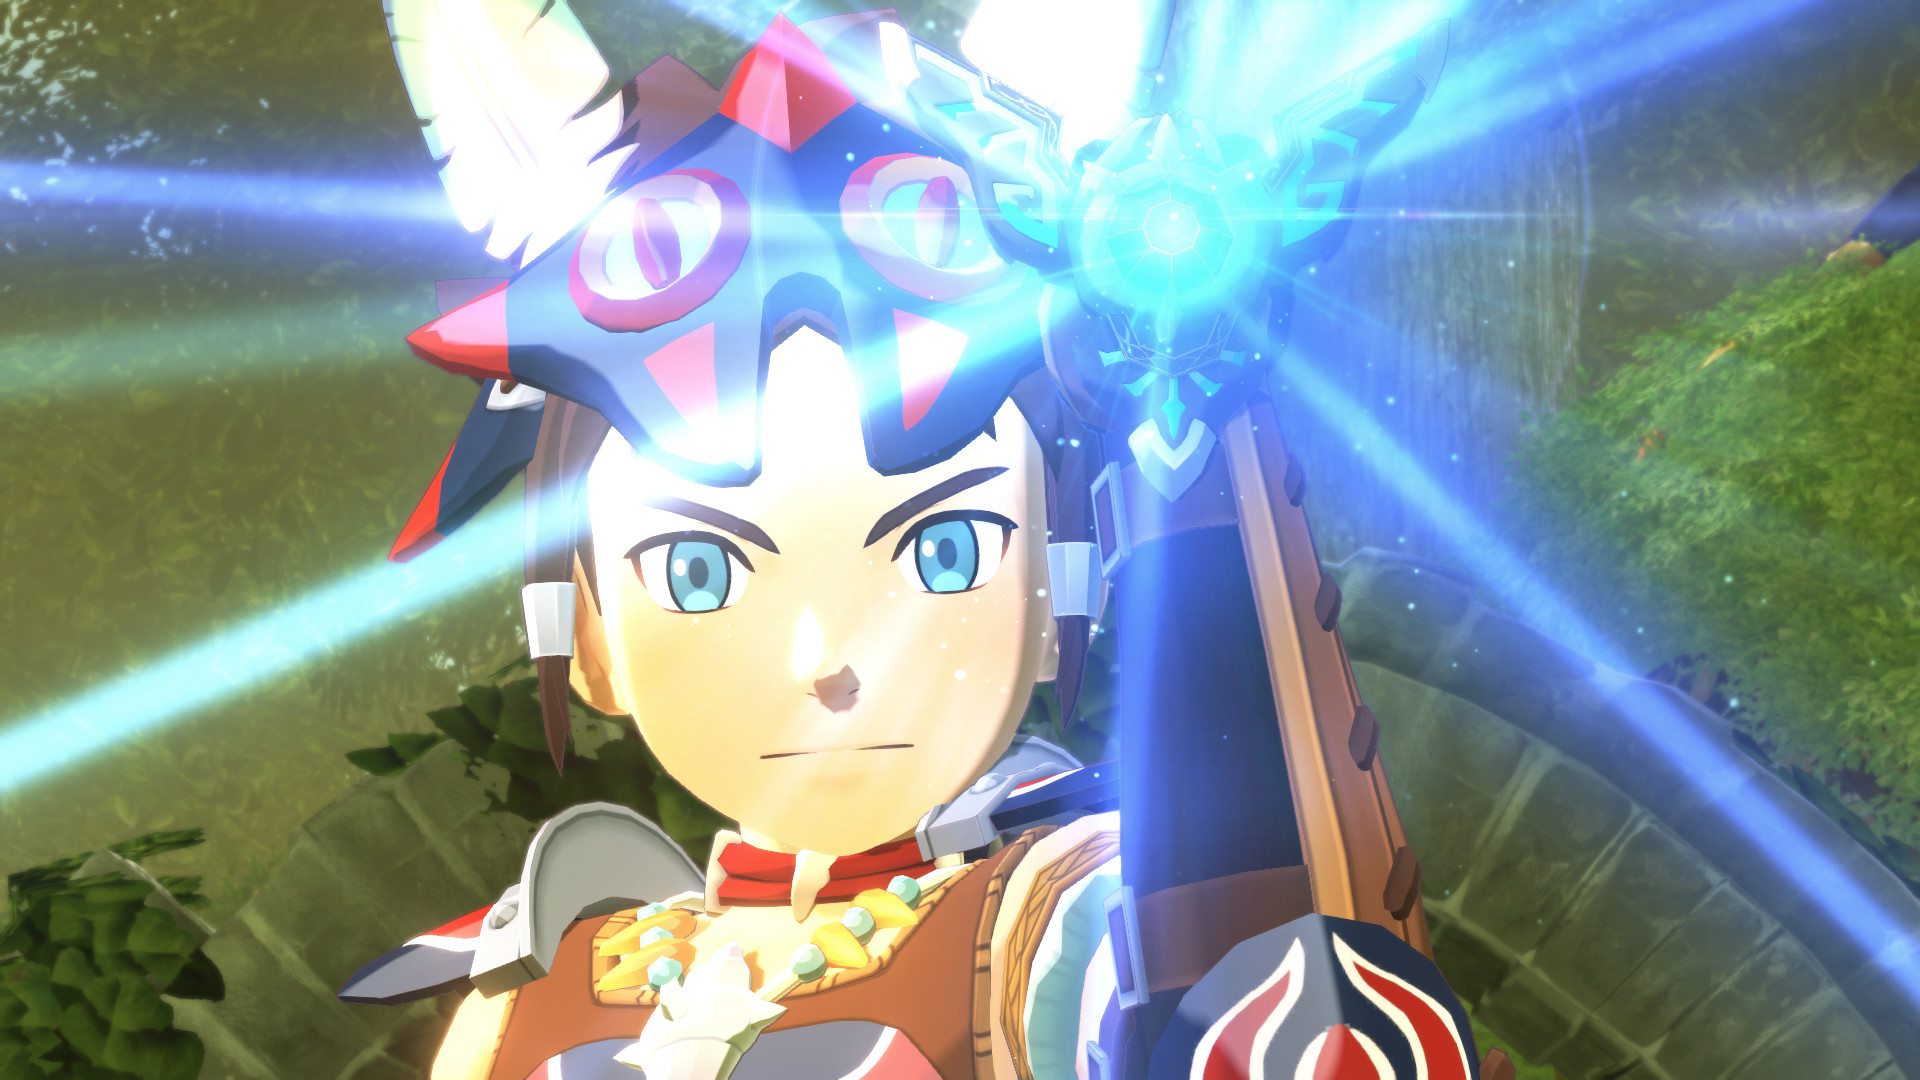 Monster Hunter Stories 2 rare monsters: How to find Nergigante and more